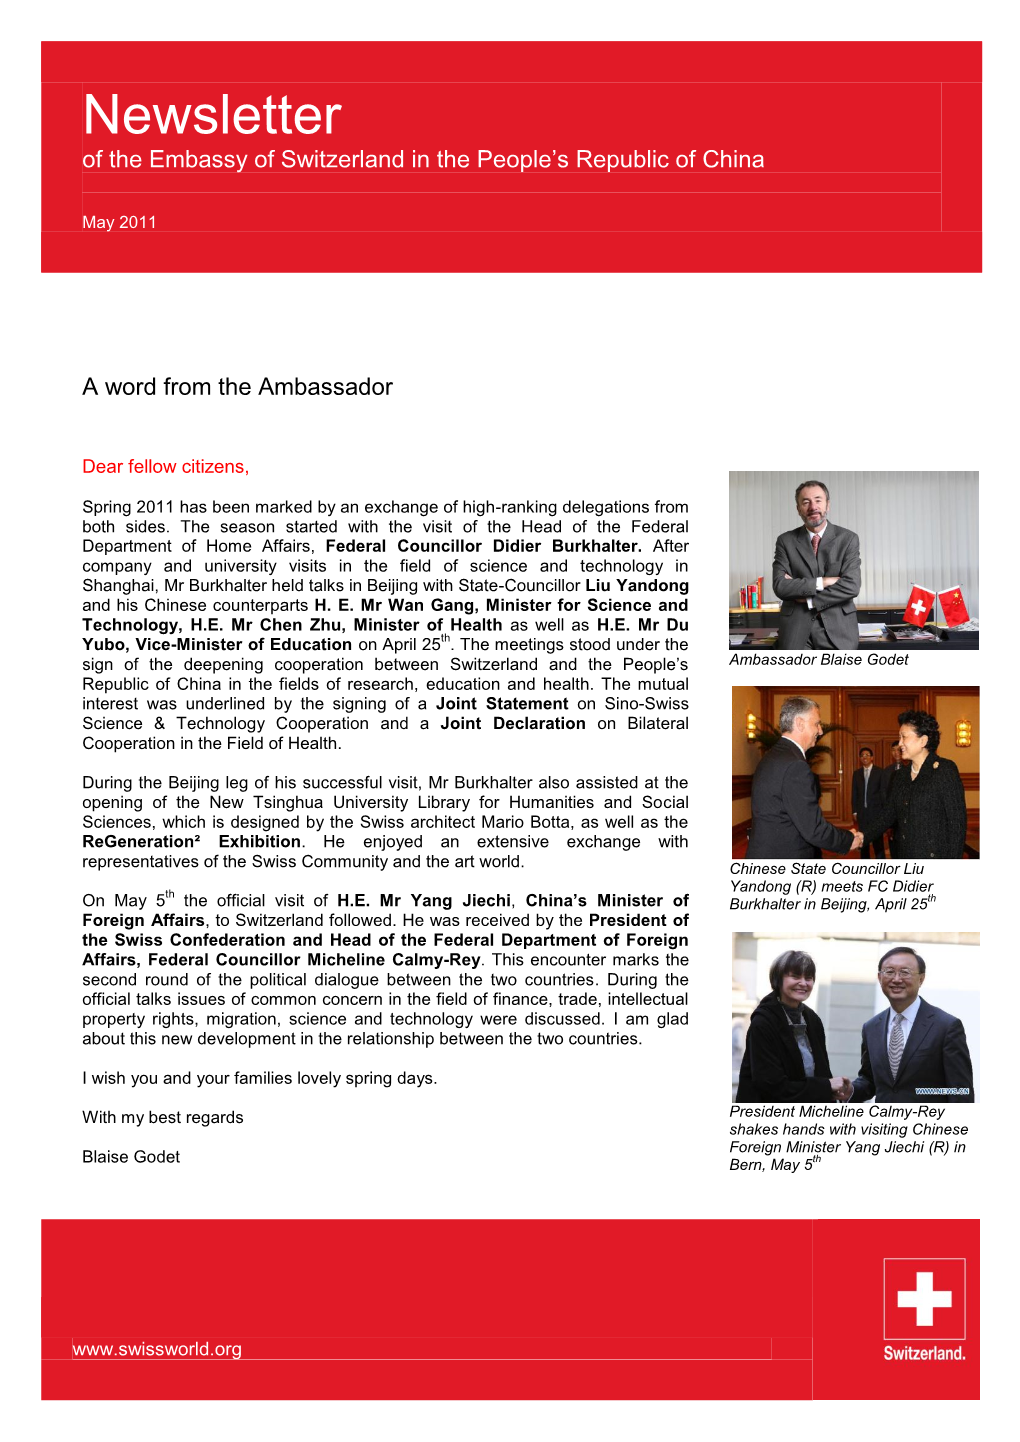 Newsletter of the Embassy of Switzerland in the People's